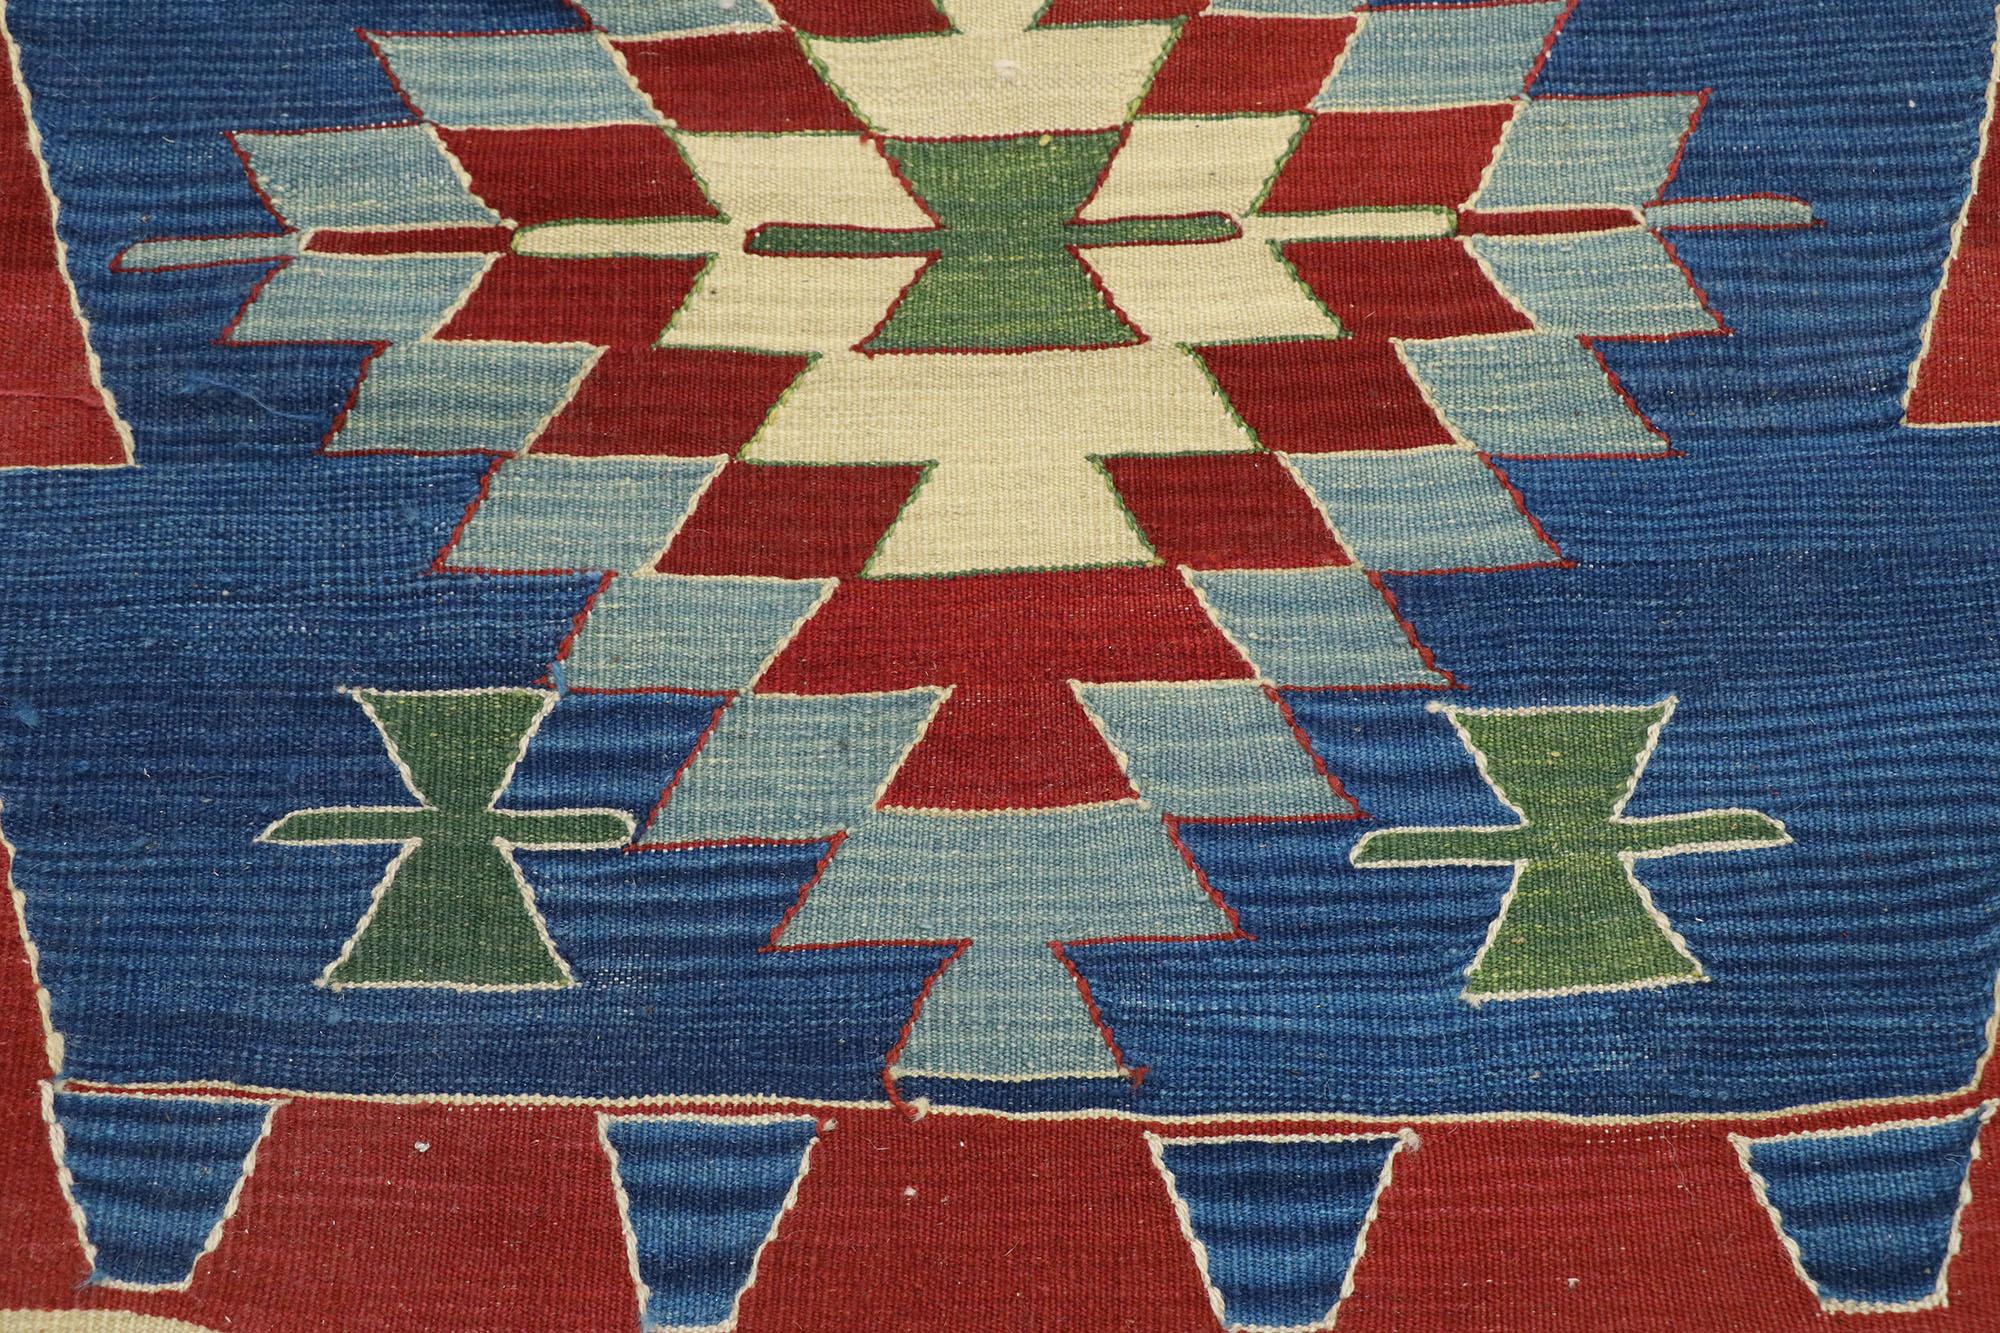 Vintage Persian Shiraz Kilim Rug, Luxury Lodge Meets Nomadic Charm In Good Condition For Sale In Dallas, TX